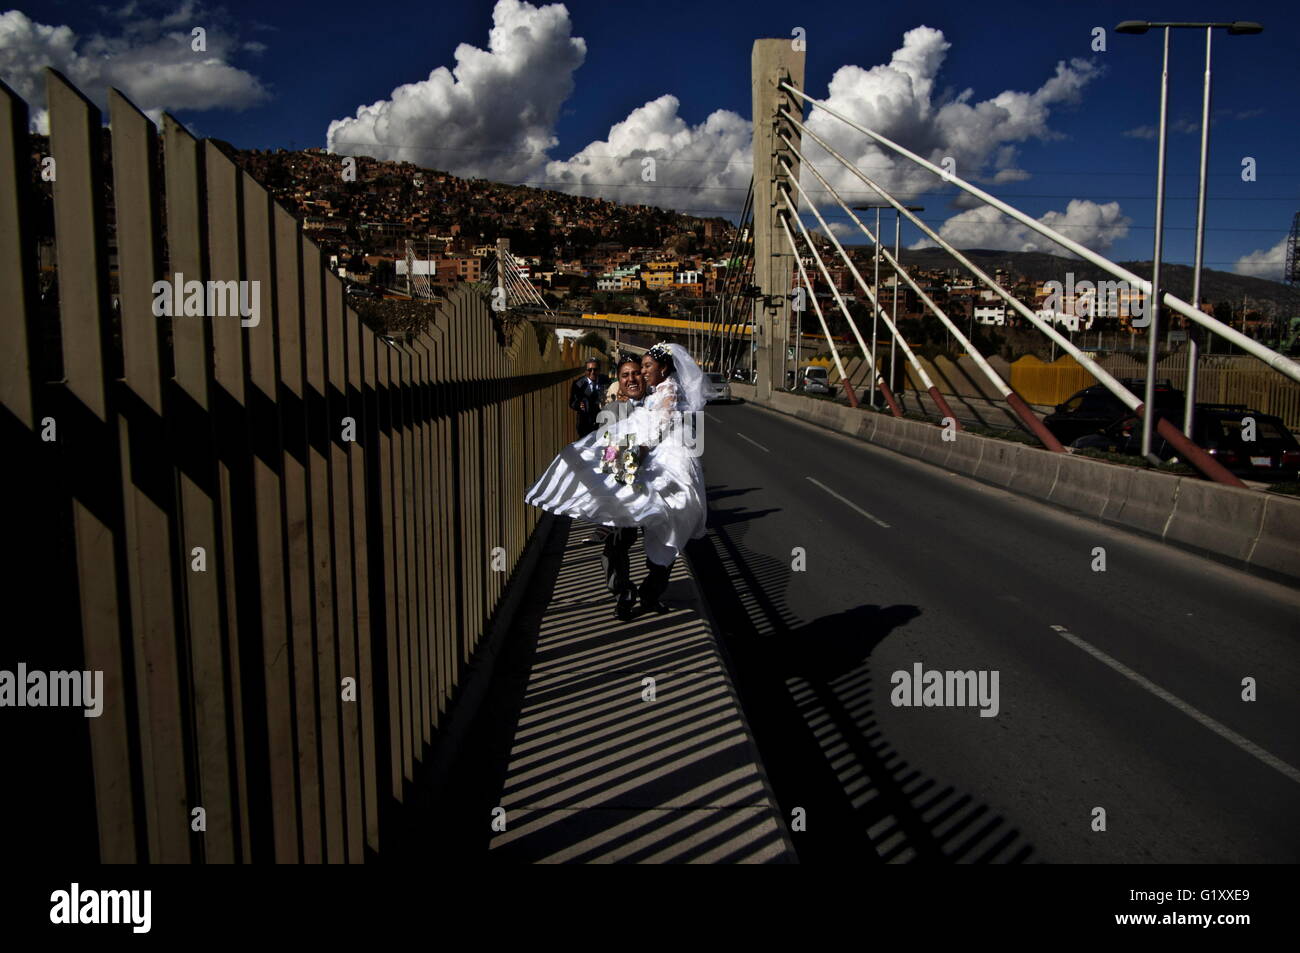 Apr 16, 2016 - La Paz, Bolivia - Weddings in the triple bridges. In La Paz, Bolivia, marriage is still considered as the economical alliance between families in the old spanish way. La Paz and El Alto most of them indigenous families get the wedding business as a very serious thing. One of the principal step for just married is going through one, two or three of the recent built continuous three bridges going from west to east canyons of the accident city. It's a way to seal a kind of pact between families and symbolically pass from a celibate life to married one. Get some champagne' (cheap ci Stock Photo